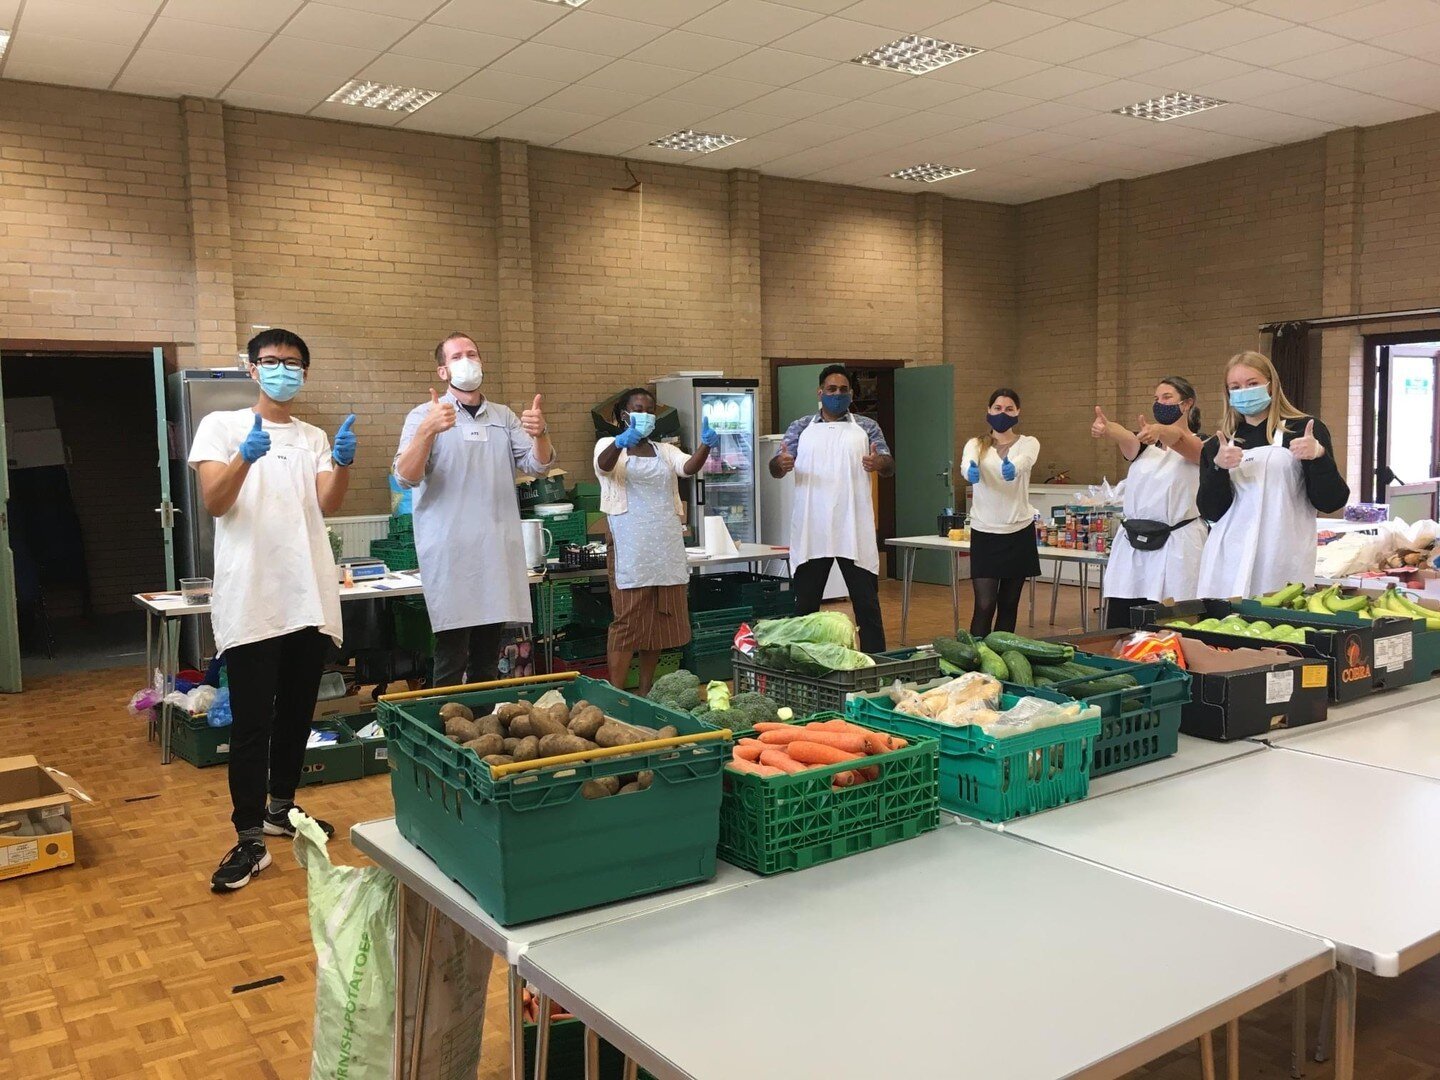 The Church of the Good Shepherd on Mansel Way in Arbury is a family-orientated church which has been hosting a food hub on Tuesdays since 2013. In the past year the number of visits to its food bank has risen significantly, averaging 177 visits per m